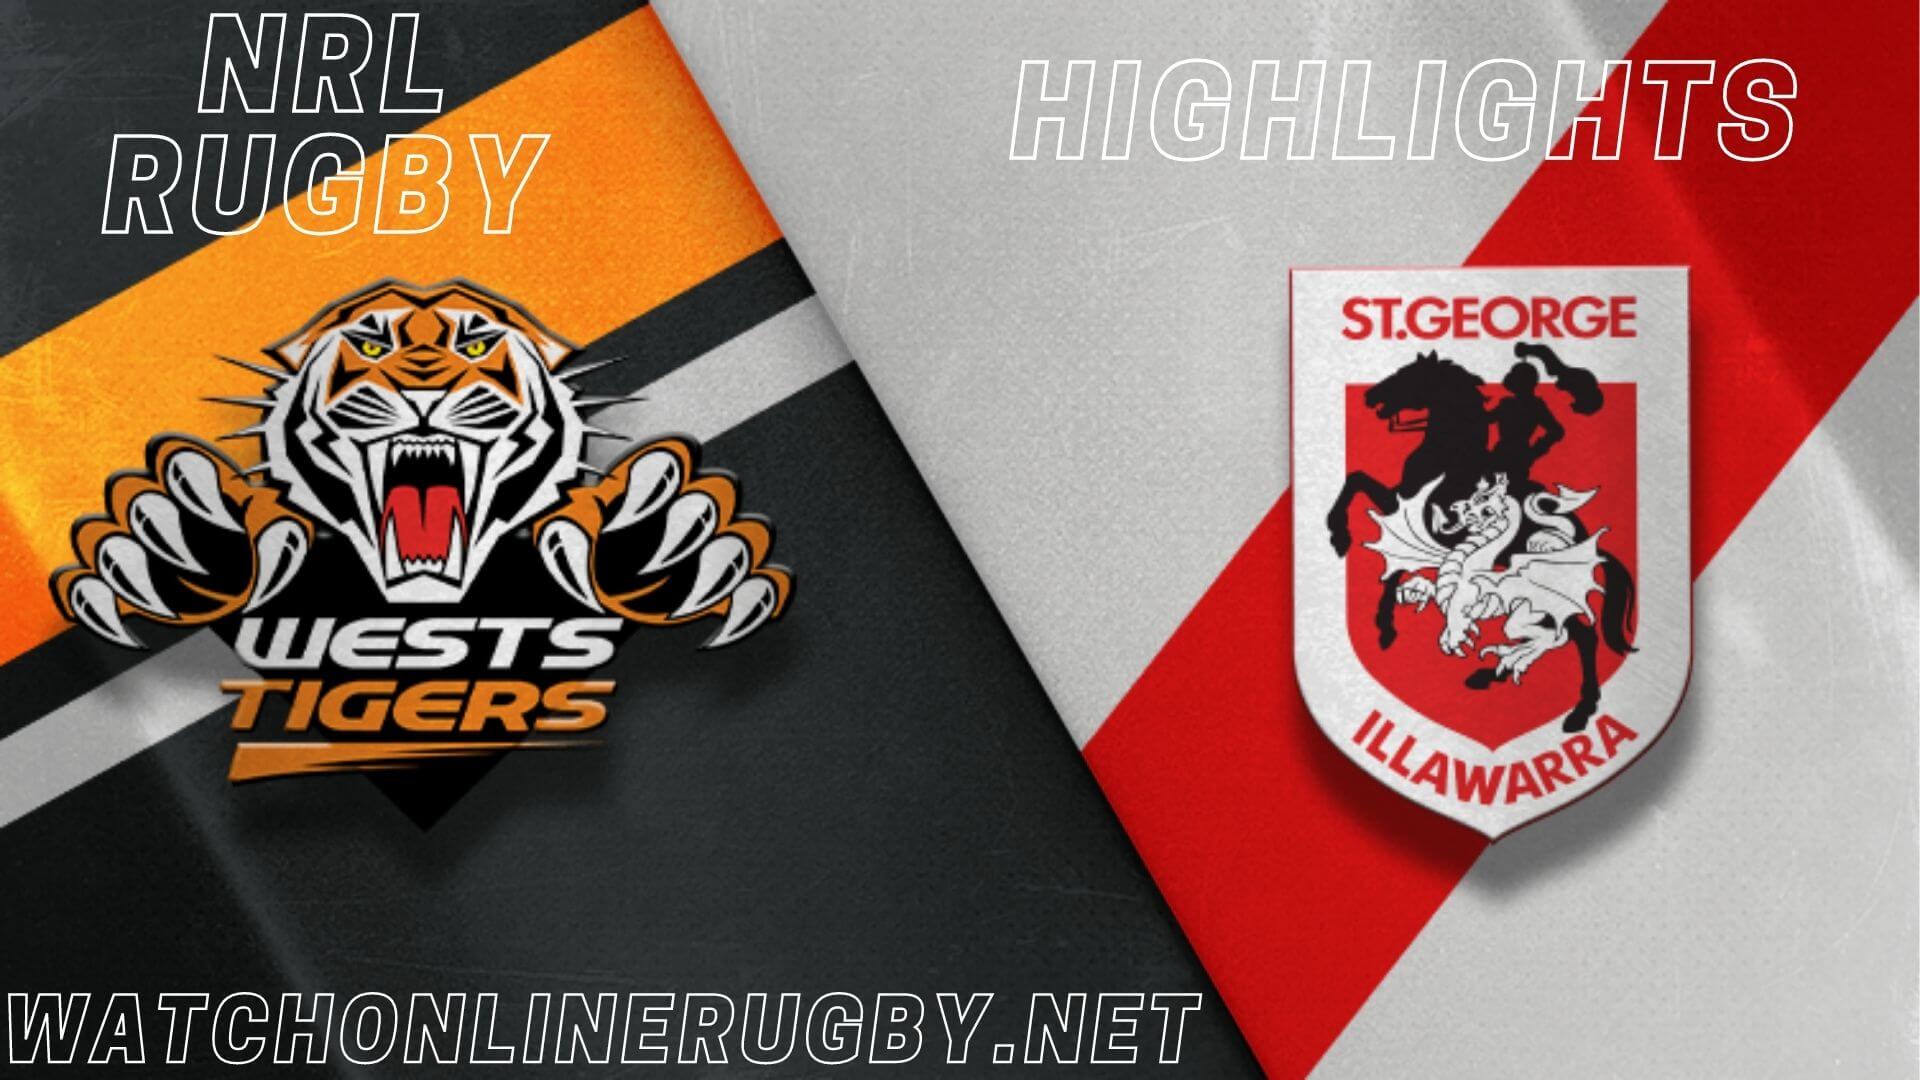 Dragons Vs Wests Tigers Highlights RD 8 NRL Rugby